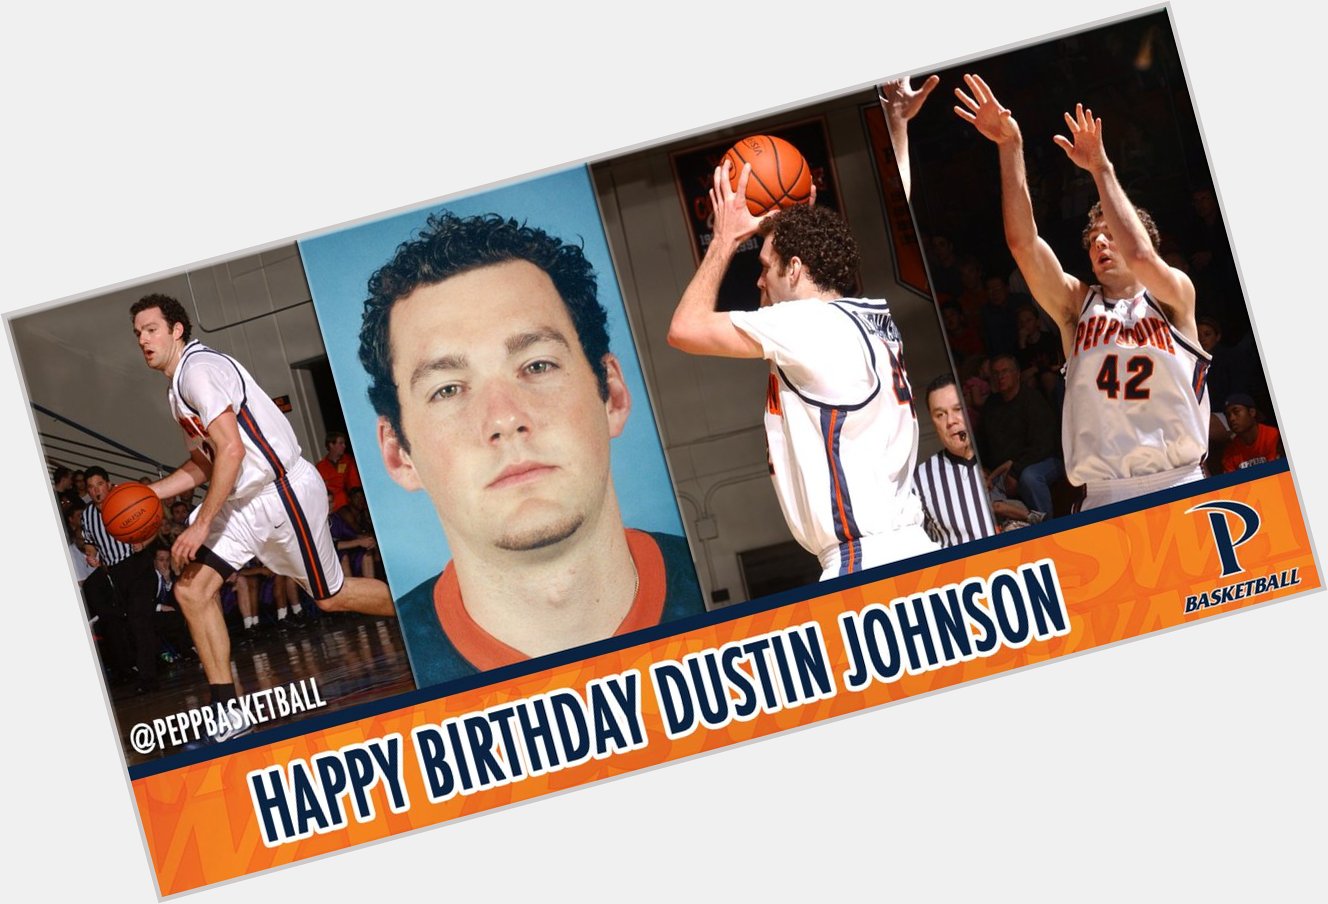 Happy birthday to Dustin Johnson, who played forward from 2000-03! 